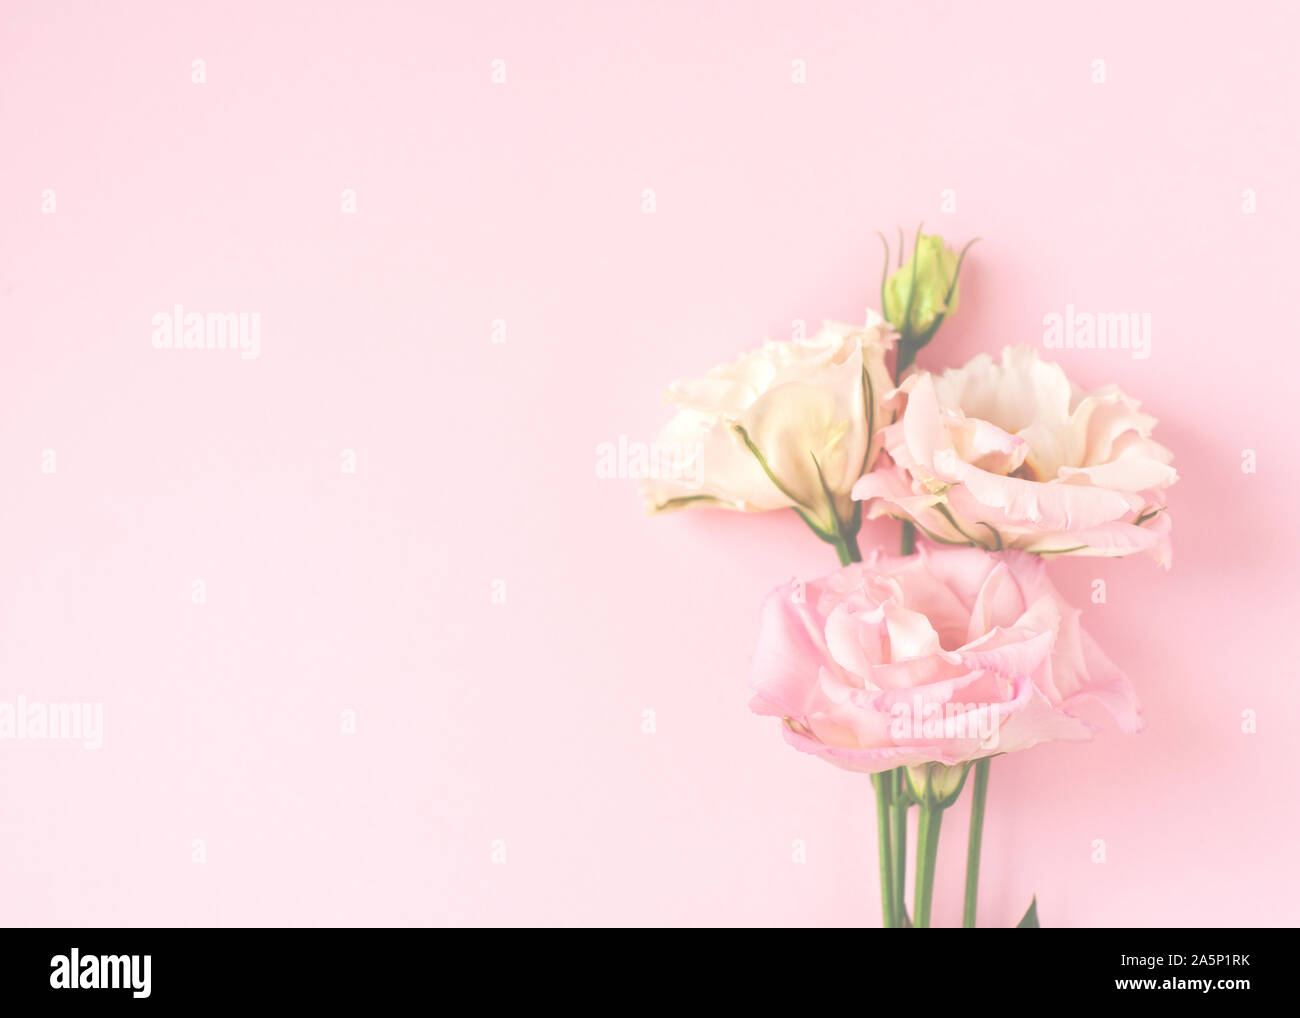 Beautiful pink and white eustoma flower (lisianthus) in full bloom with green leaves. Bouquet of flowers on pink background. Stock Photo